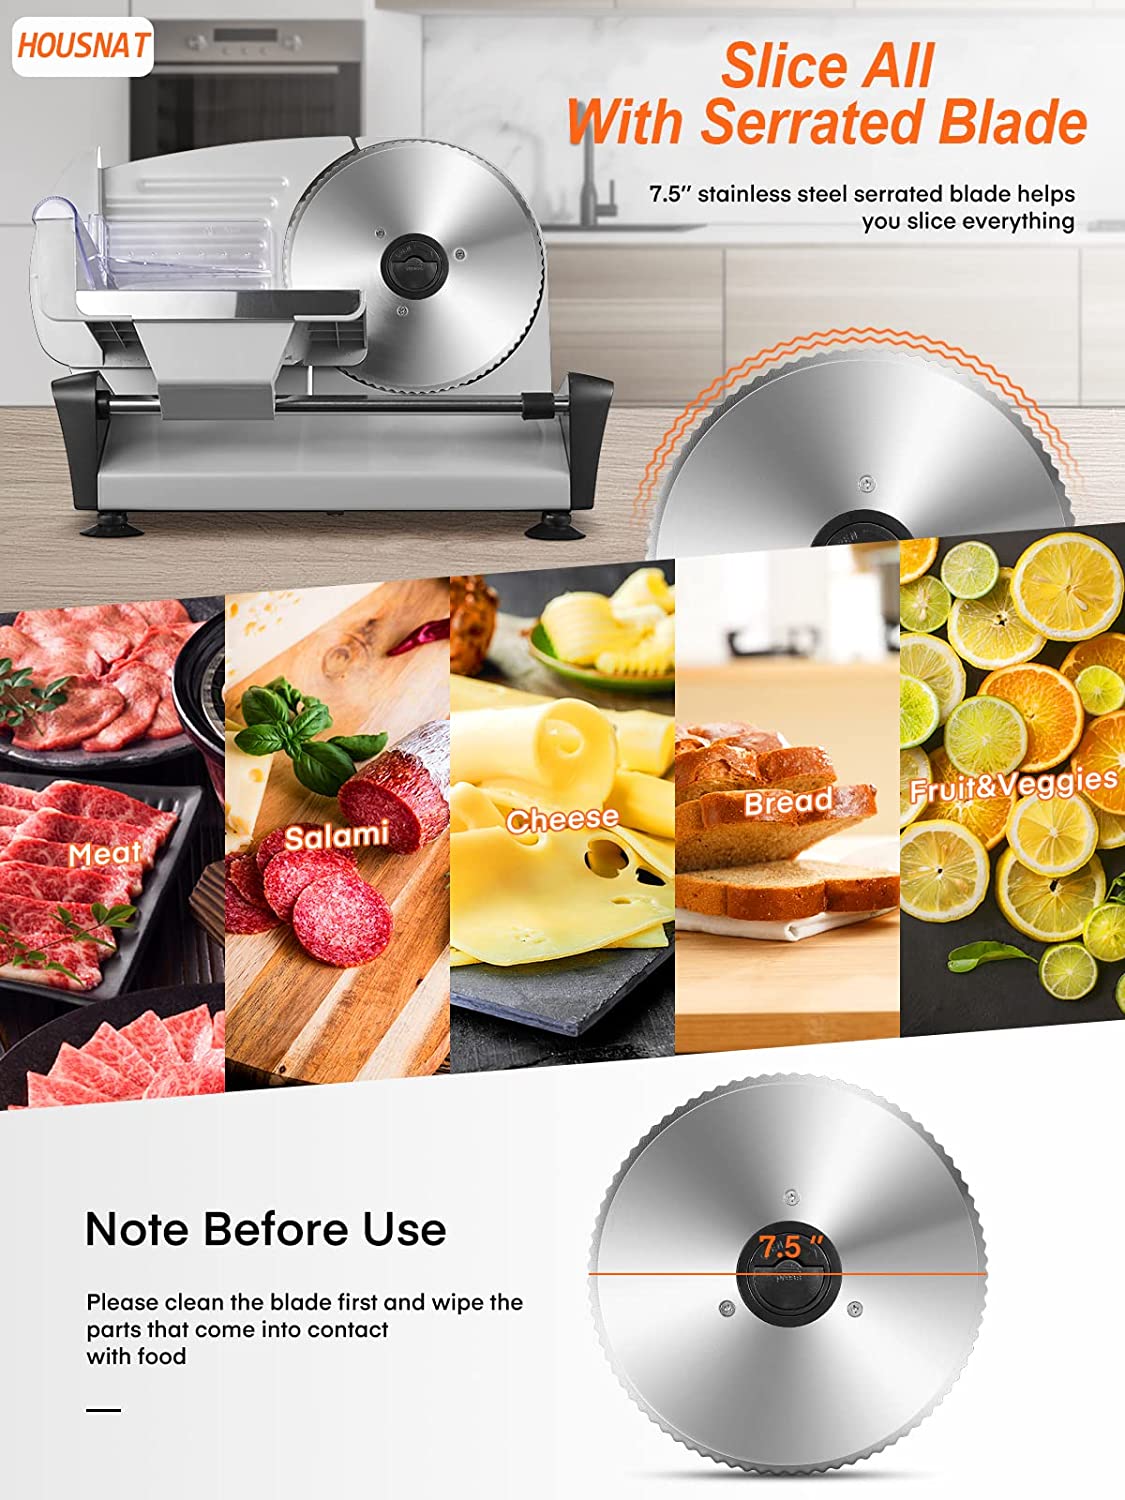 slice all with serrated blade, Meat Slicer For Home Use, Housnat Kitchen Pro Electric Deli & Food Slicer with 0-15mm Adjustable Thickness and 7.5" Stainless Steel Blade Cuts Meat, Cheese, Bread, Include Food Pusher, 150W